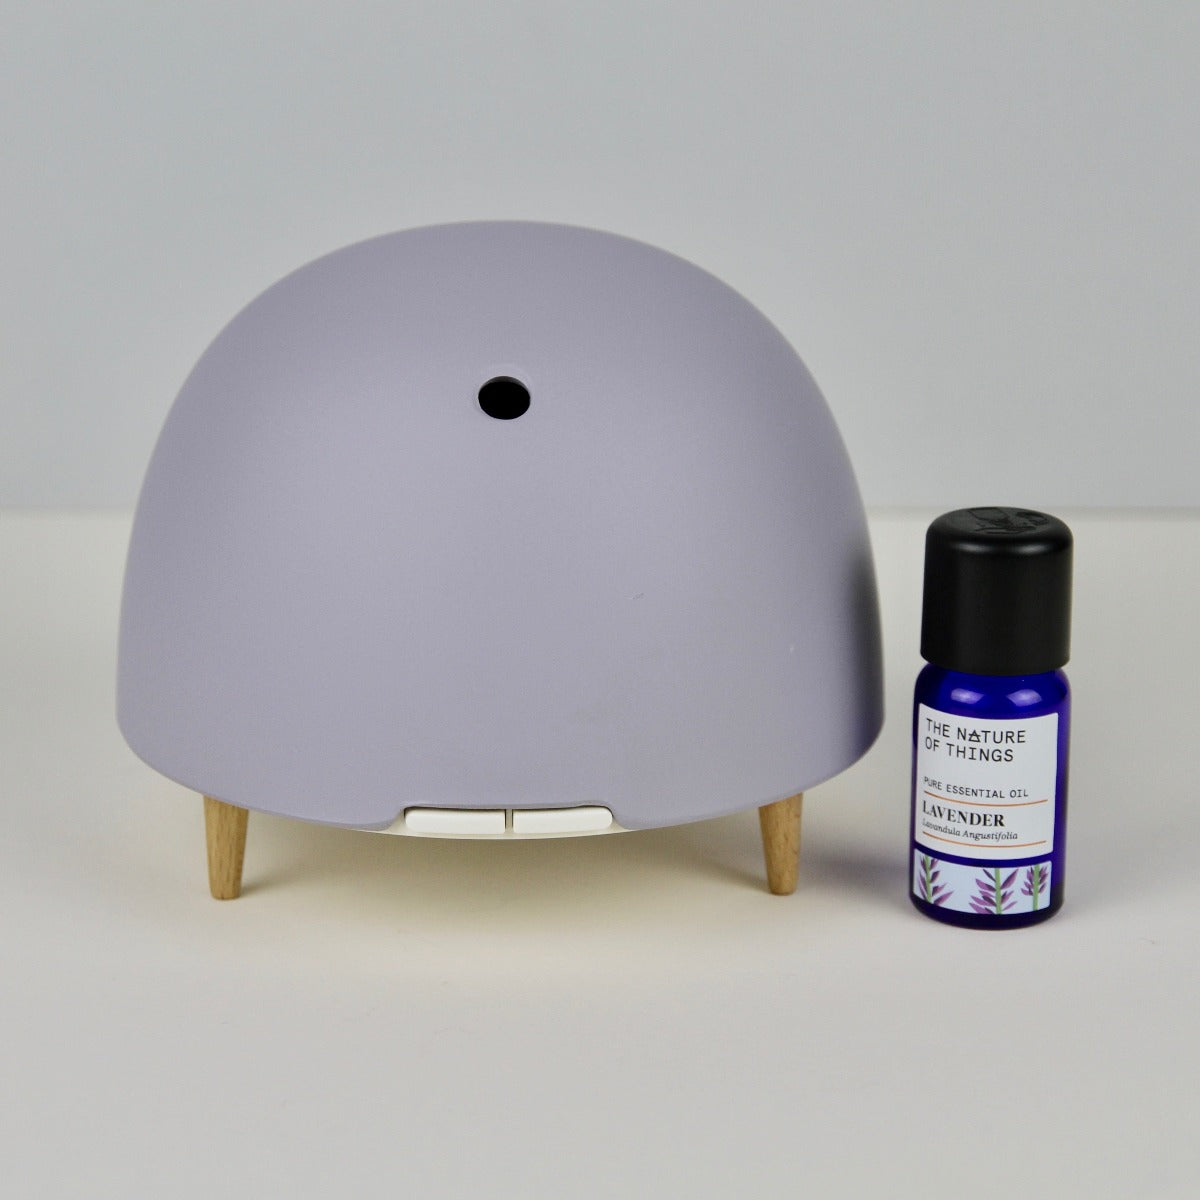 Diffuser of Essential Oils (model Maël© lavender) from The Nature of Things